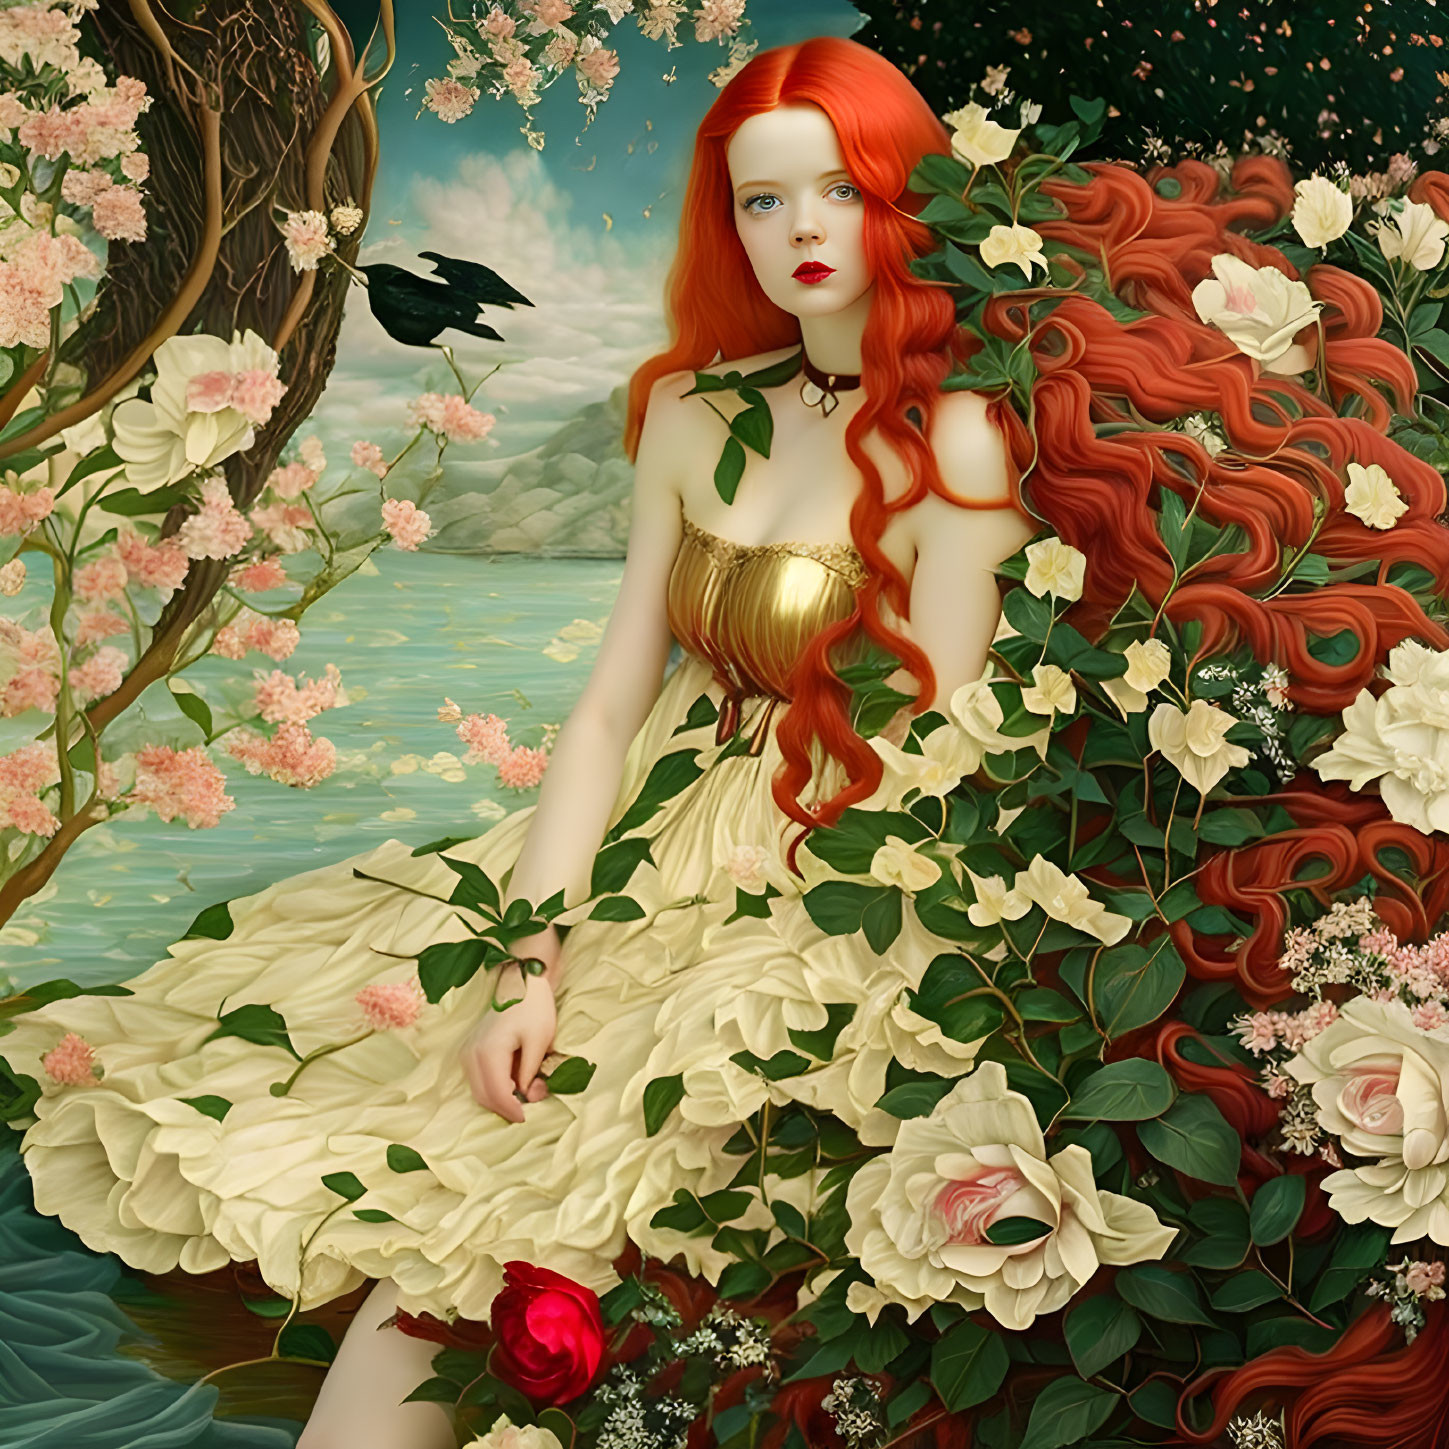 Surreal portrait of woman with red hair in yellow dress among flowers and bird